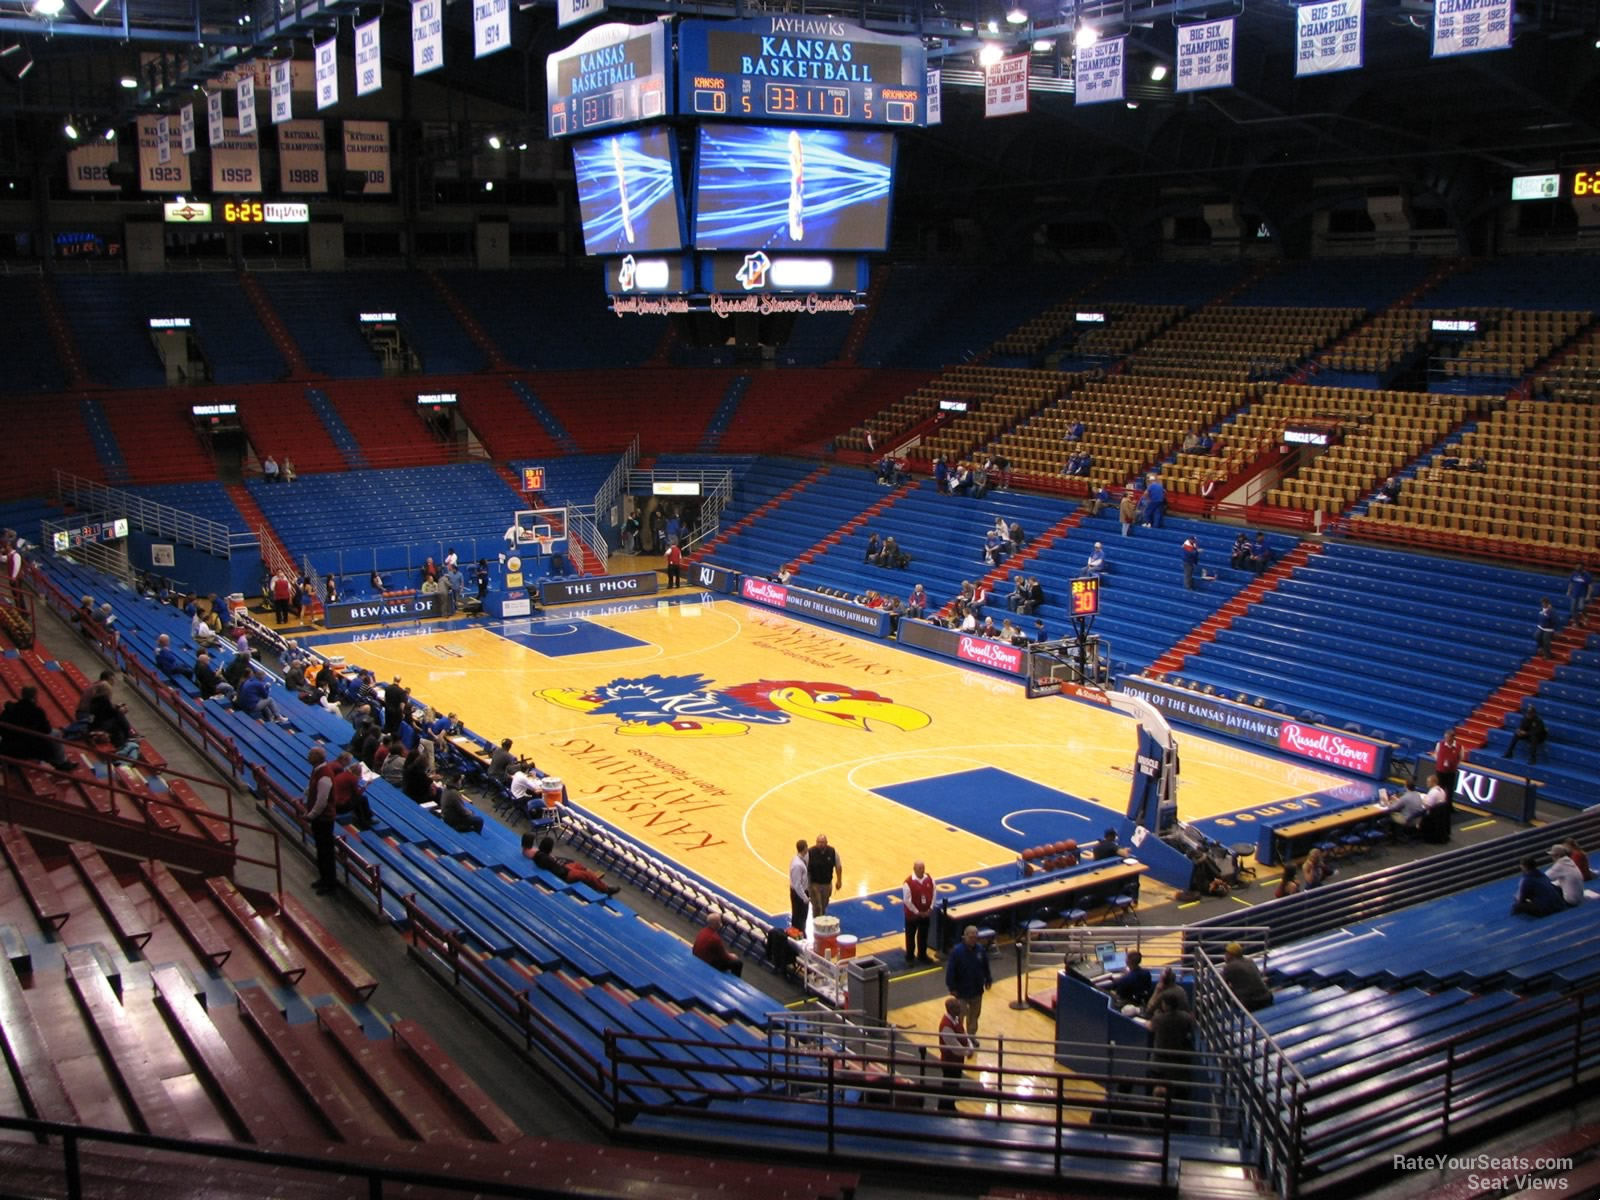 section 13a, row 18 seat view  - allen fieldhouse